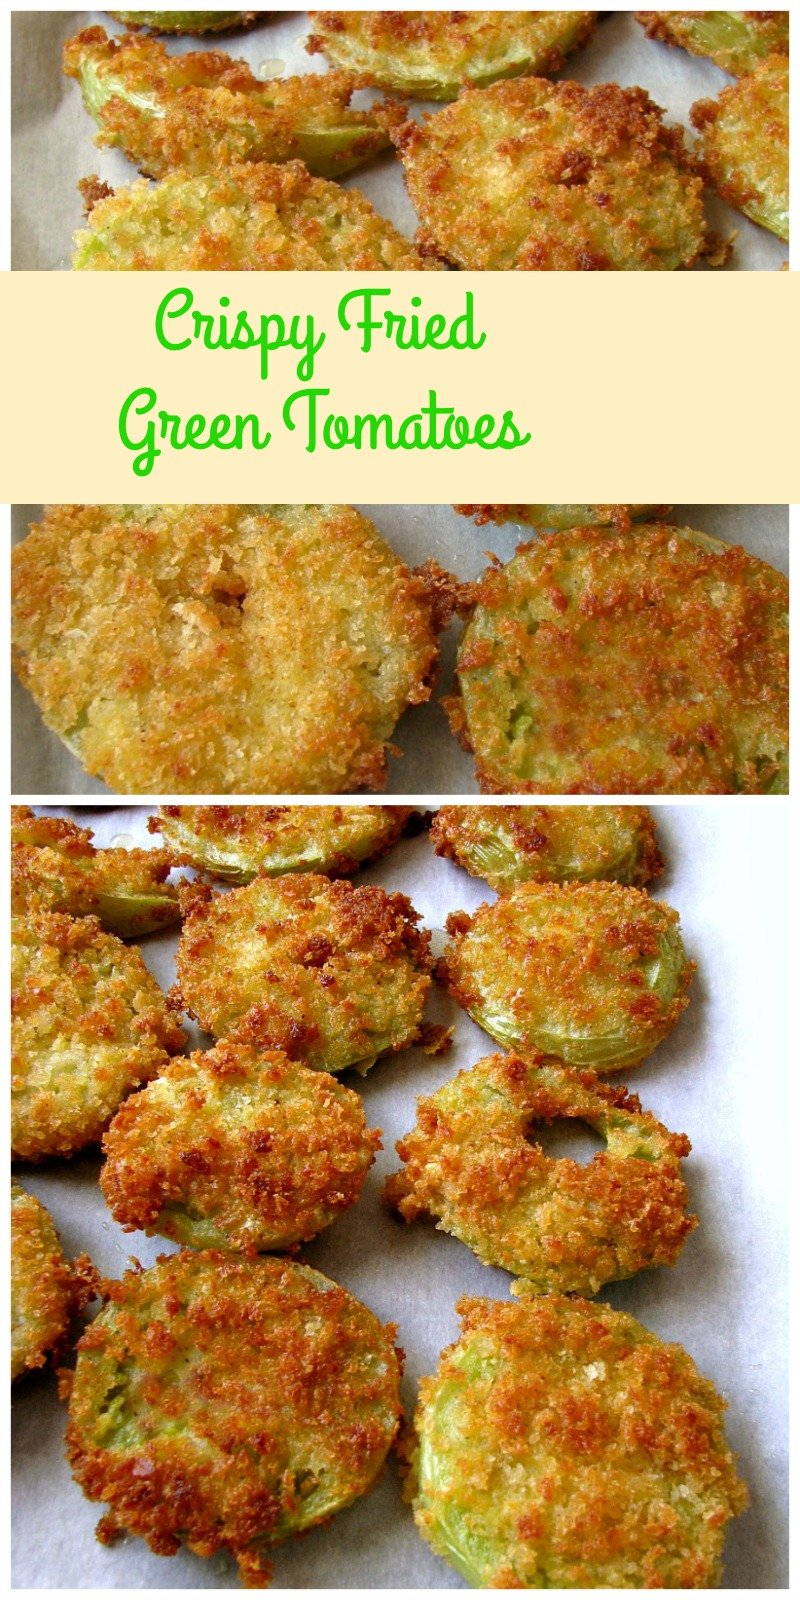 Crispy Fried Green Tomatoes- A summertime favorites, these Crispy Fried Green Tomatoes are made with Panko breakcrumbs mixed with garlic, onion, and a little kick of cayenne pepper.